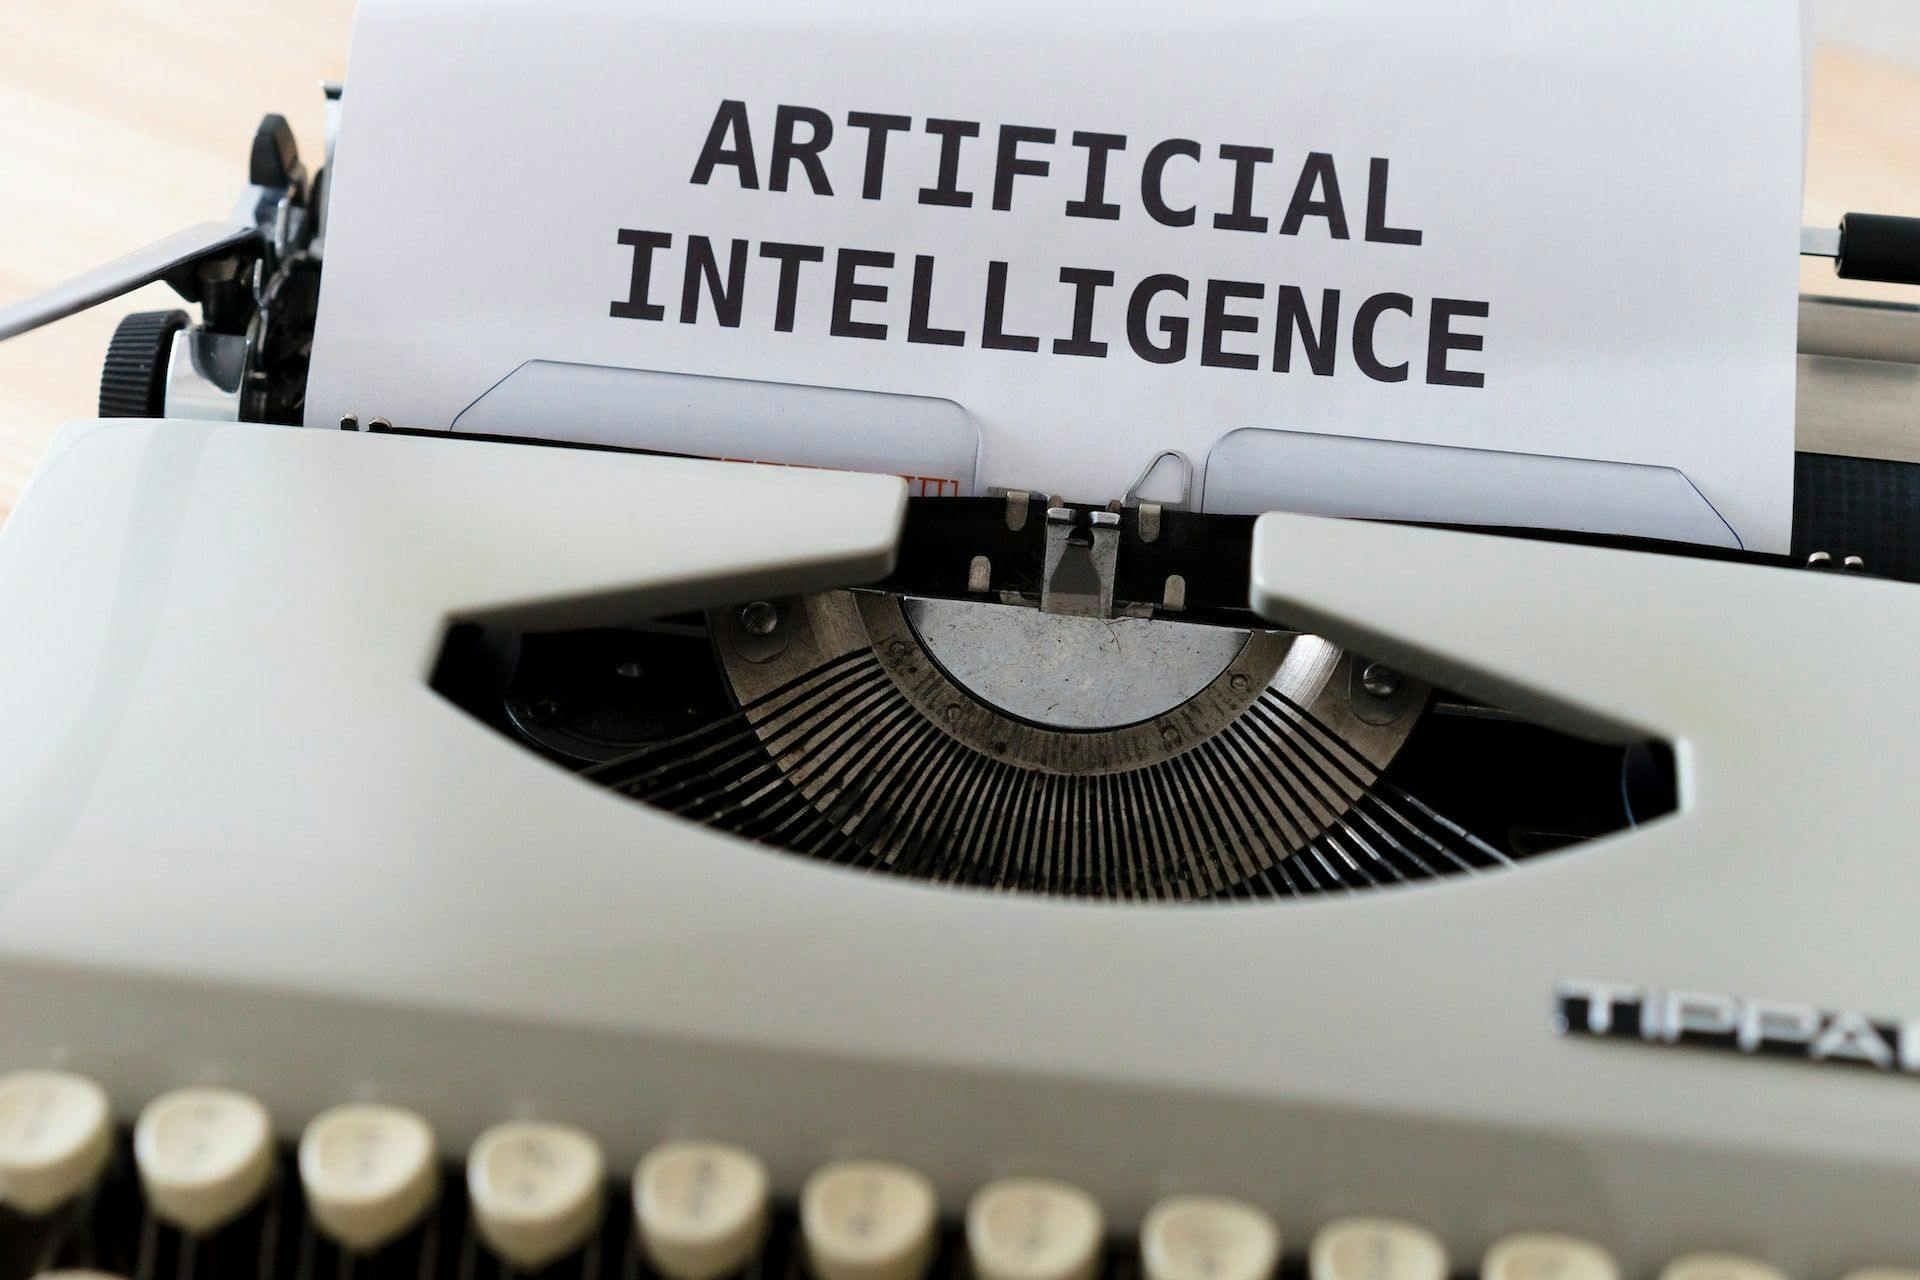 5) Artificial Intelligence, Machine Learning - What is AI and ML concepts?